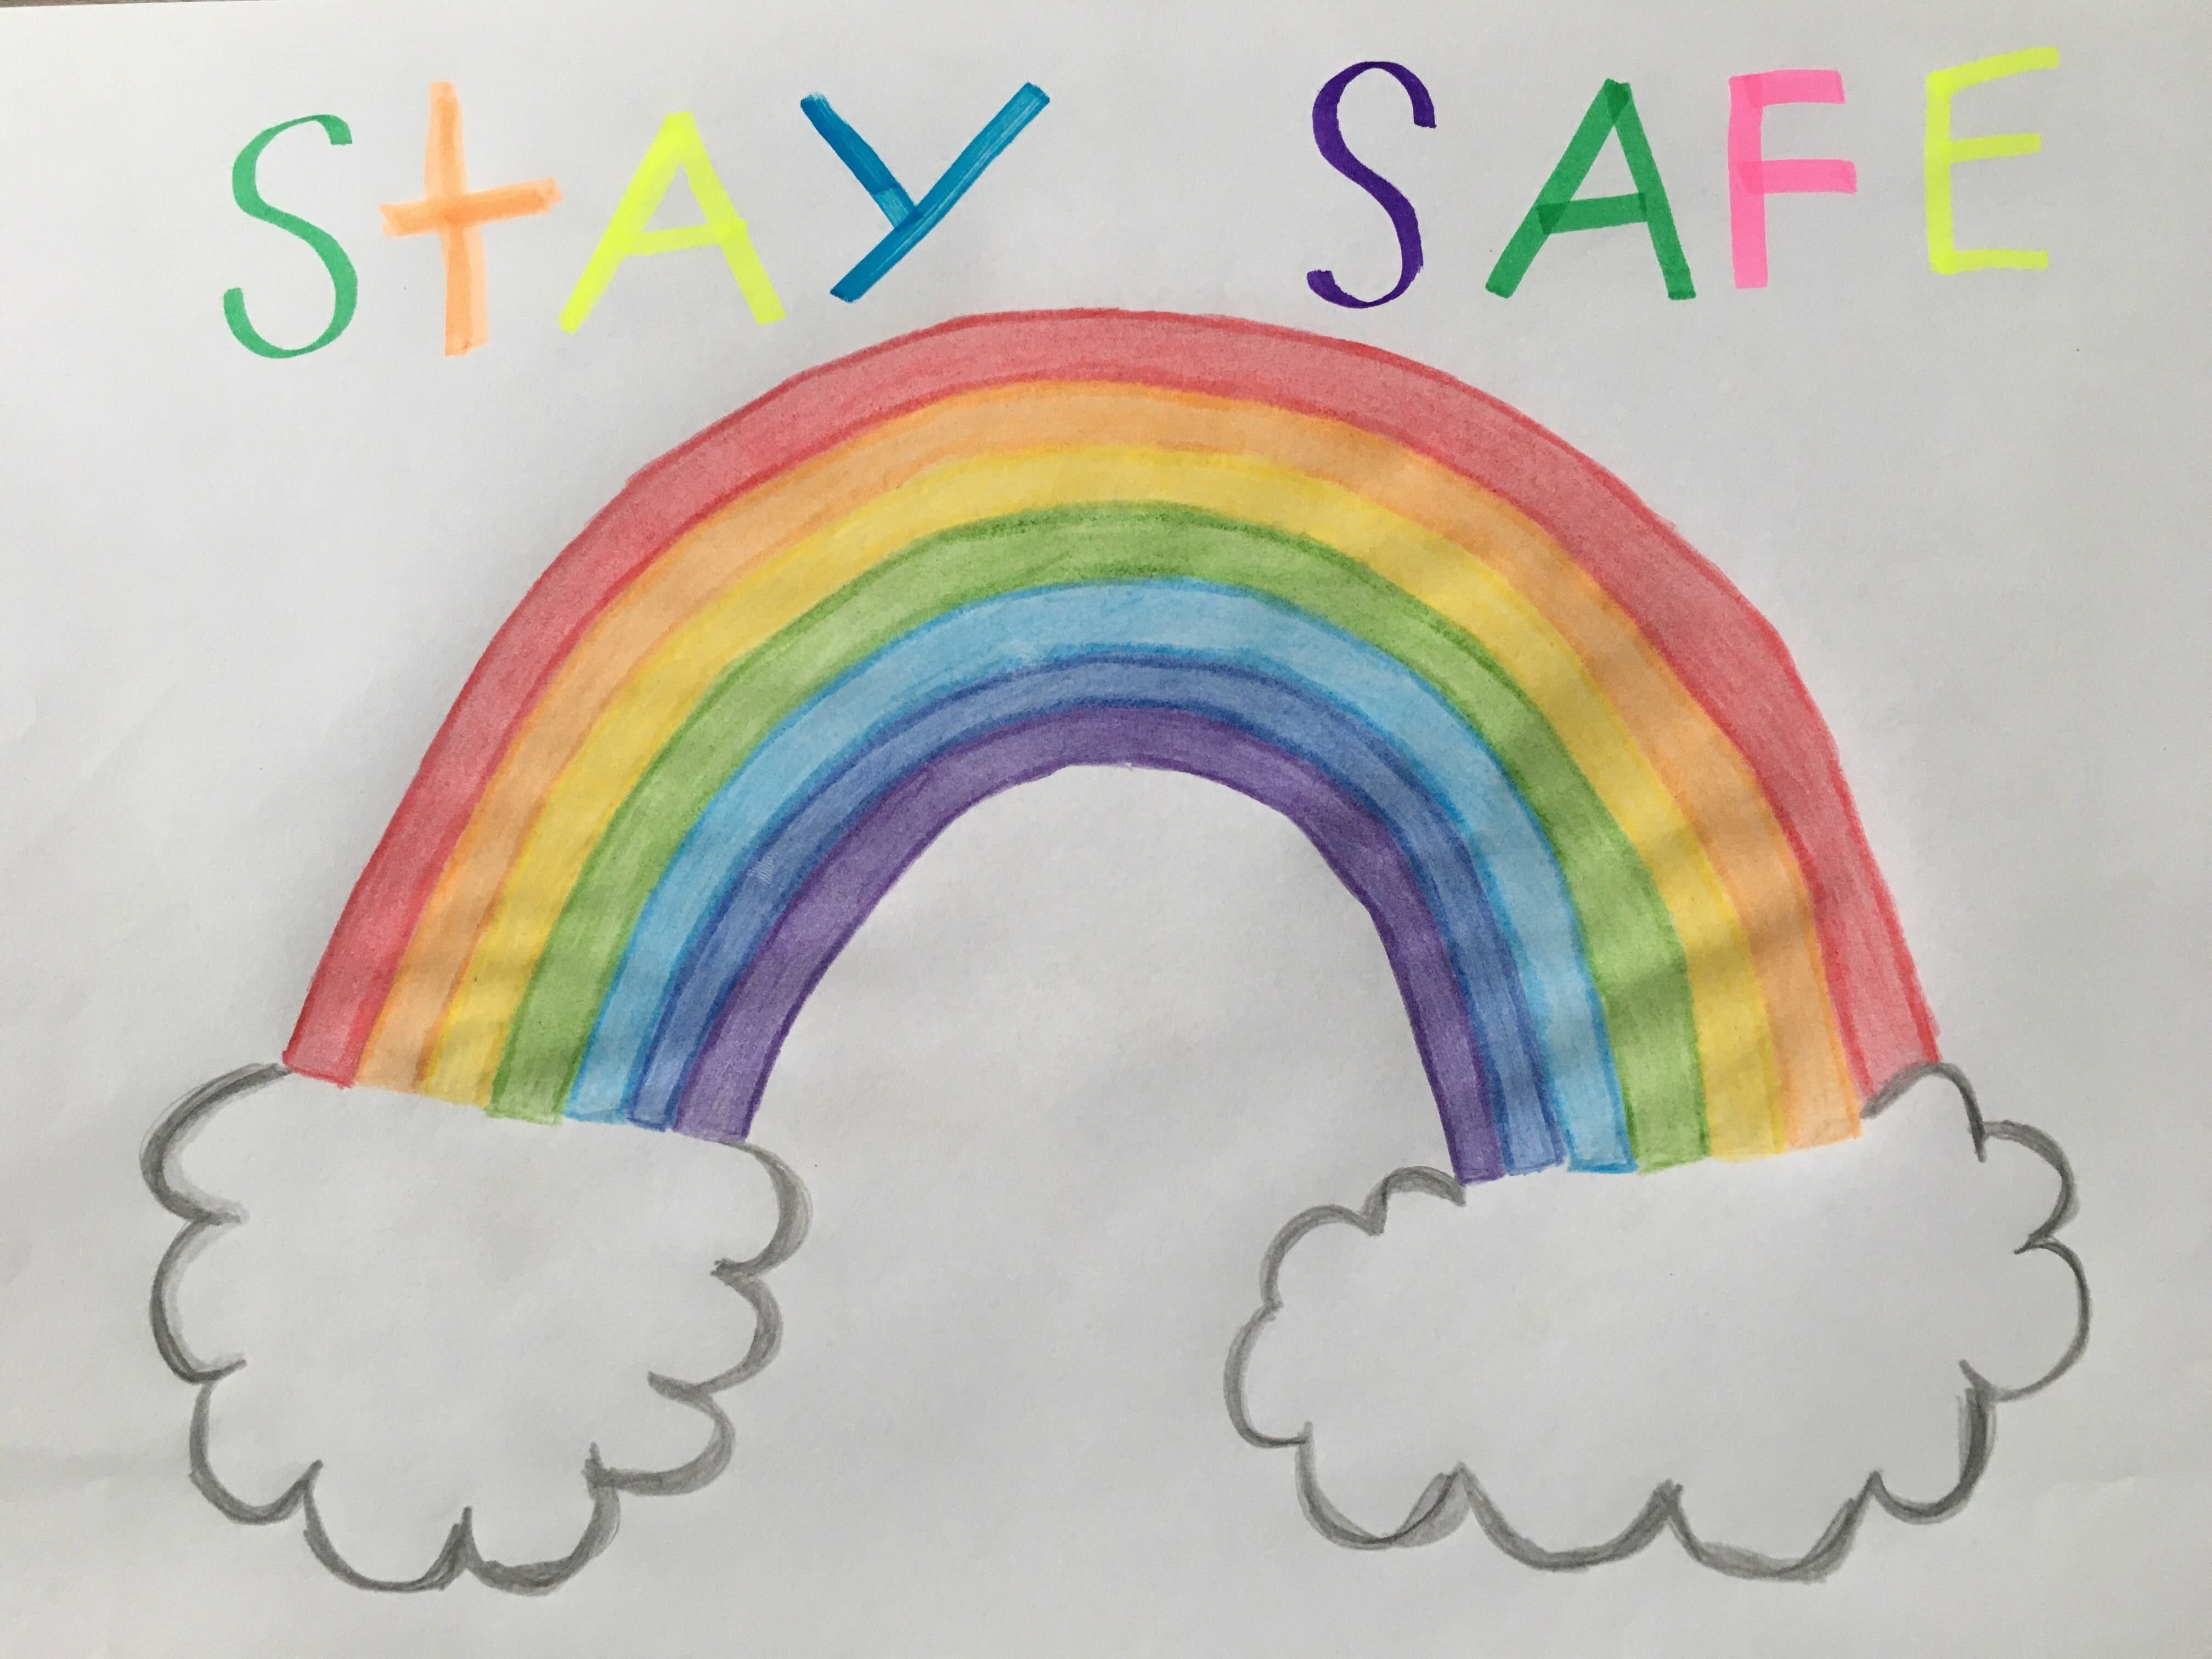 Children's drawing of a rainbow with the words 'stay safe' written above it